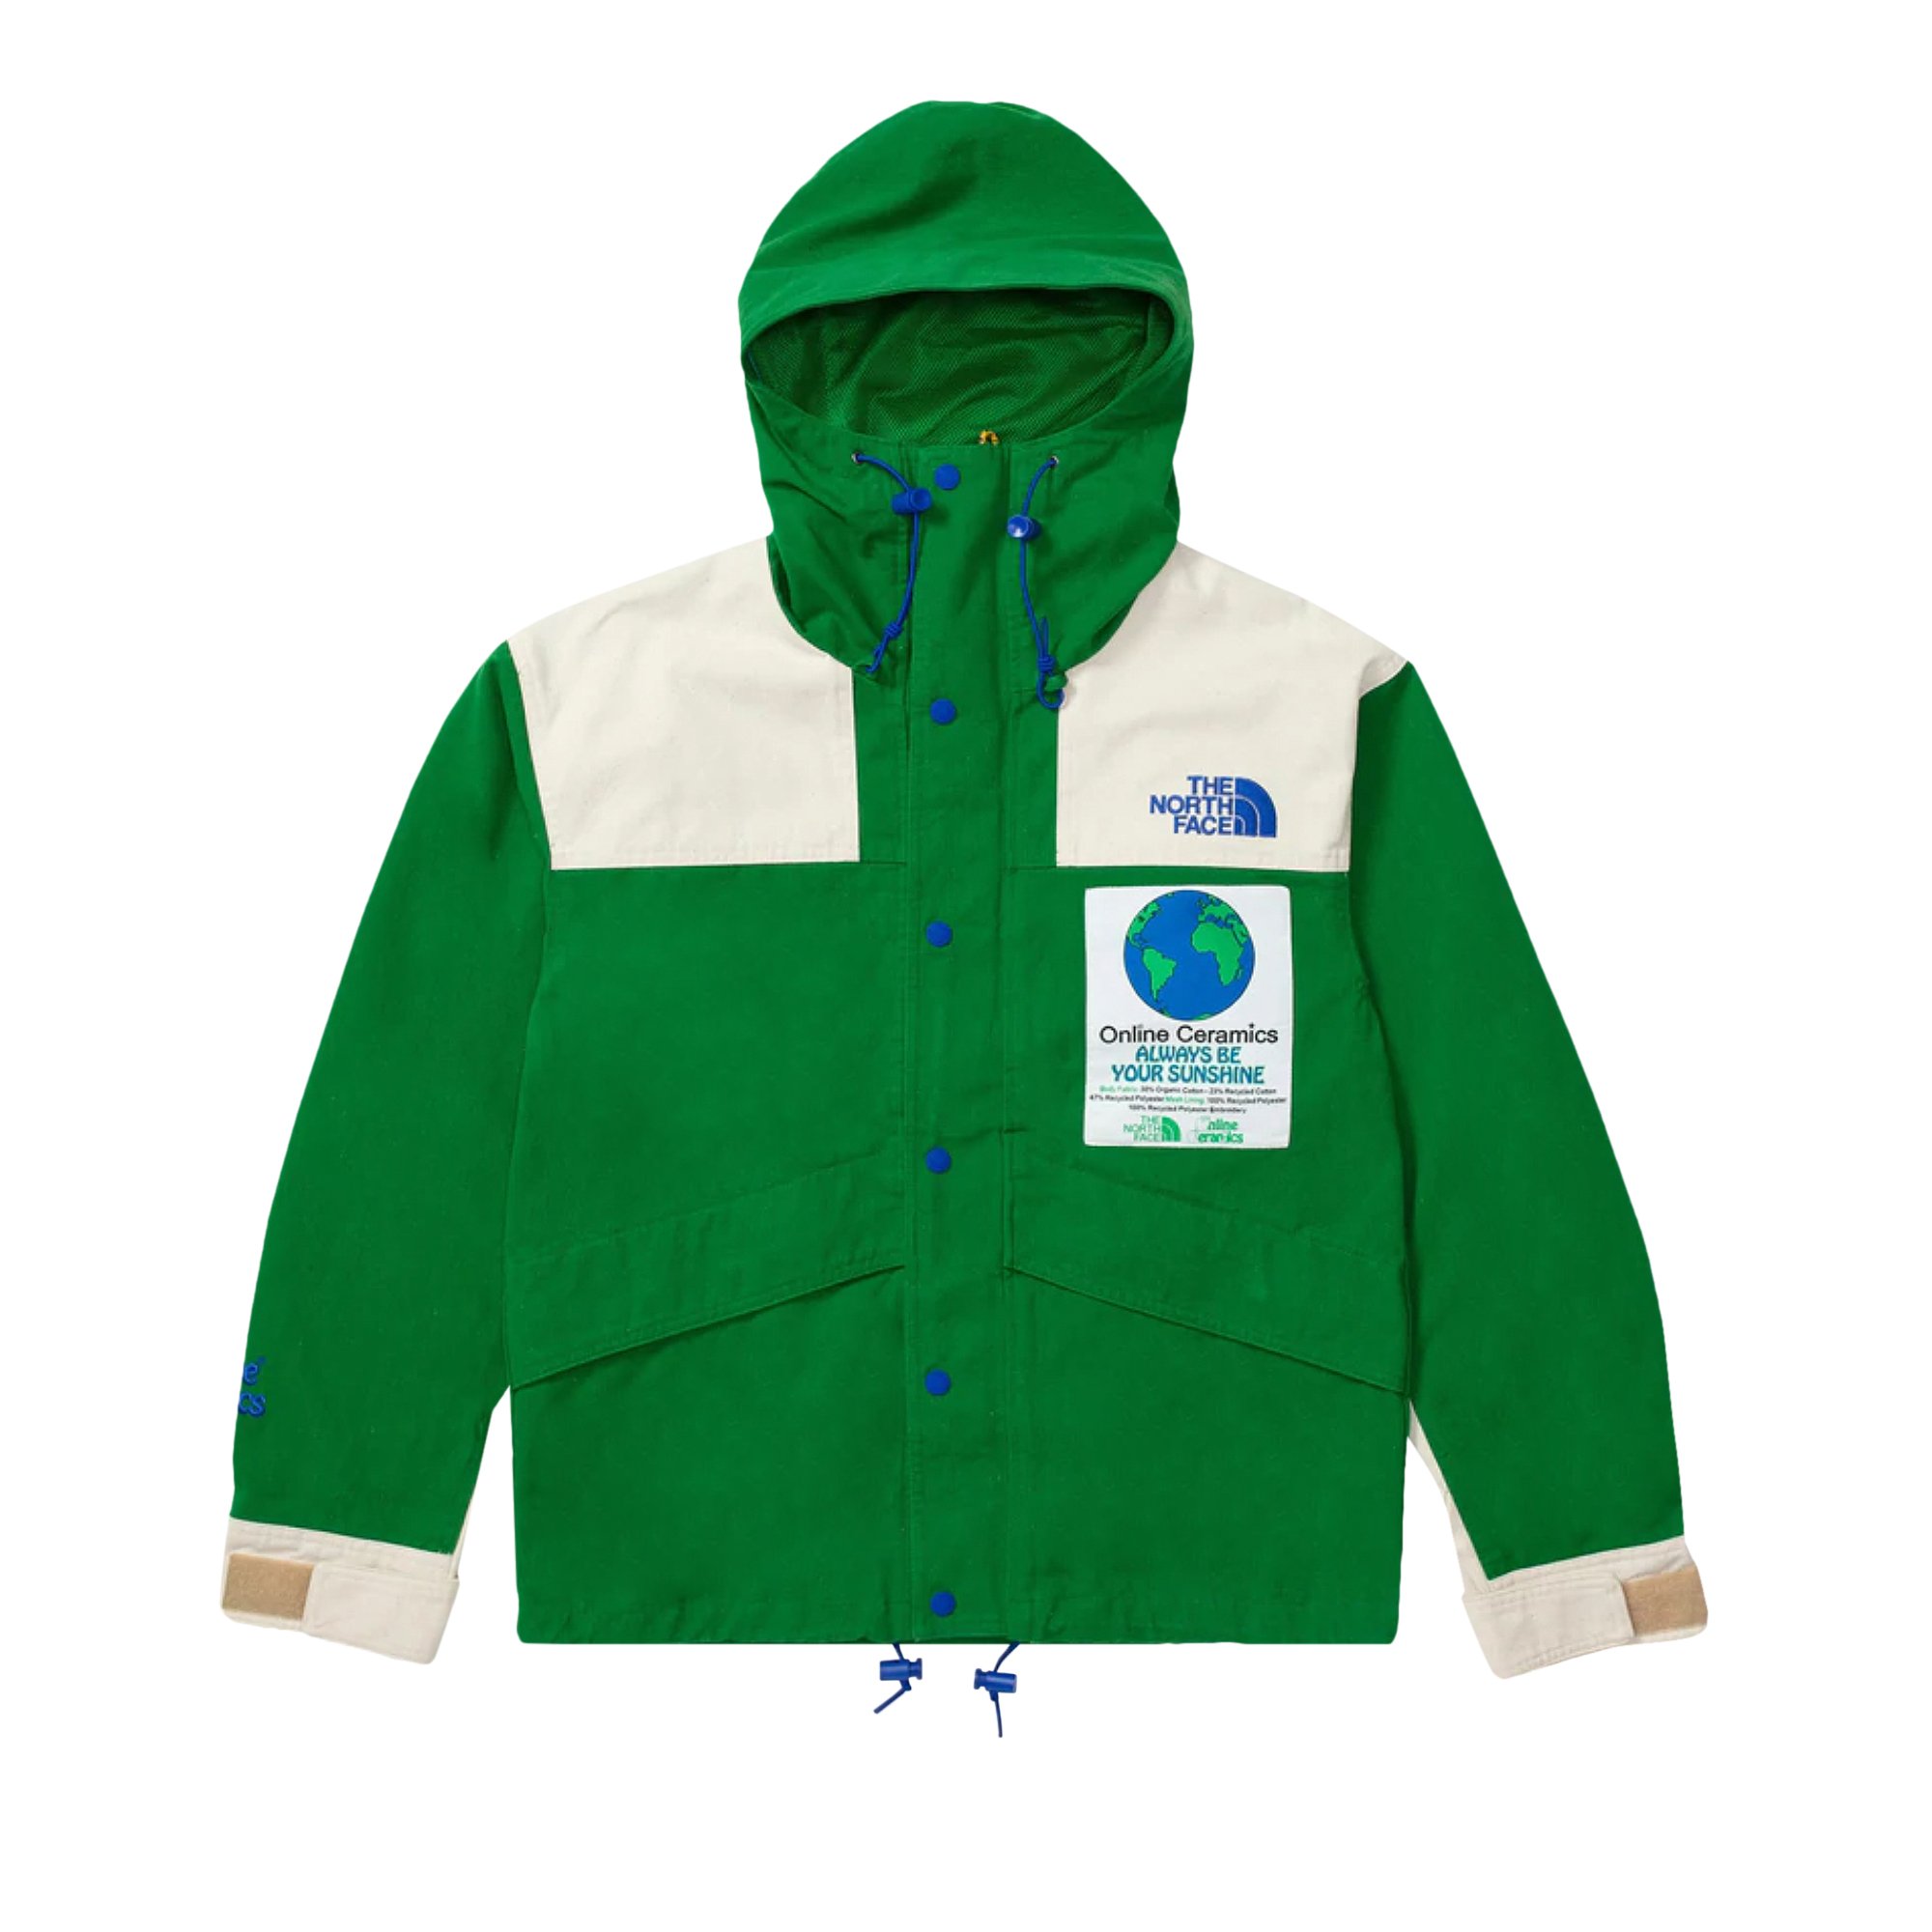 The North Face x Online Ceramics 86 Mountain Jacket 'Arden Green'